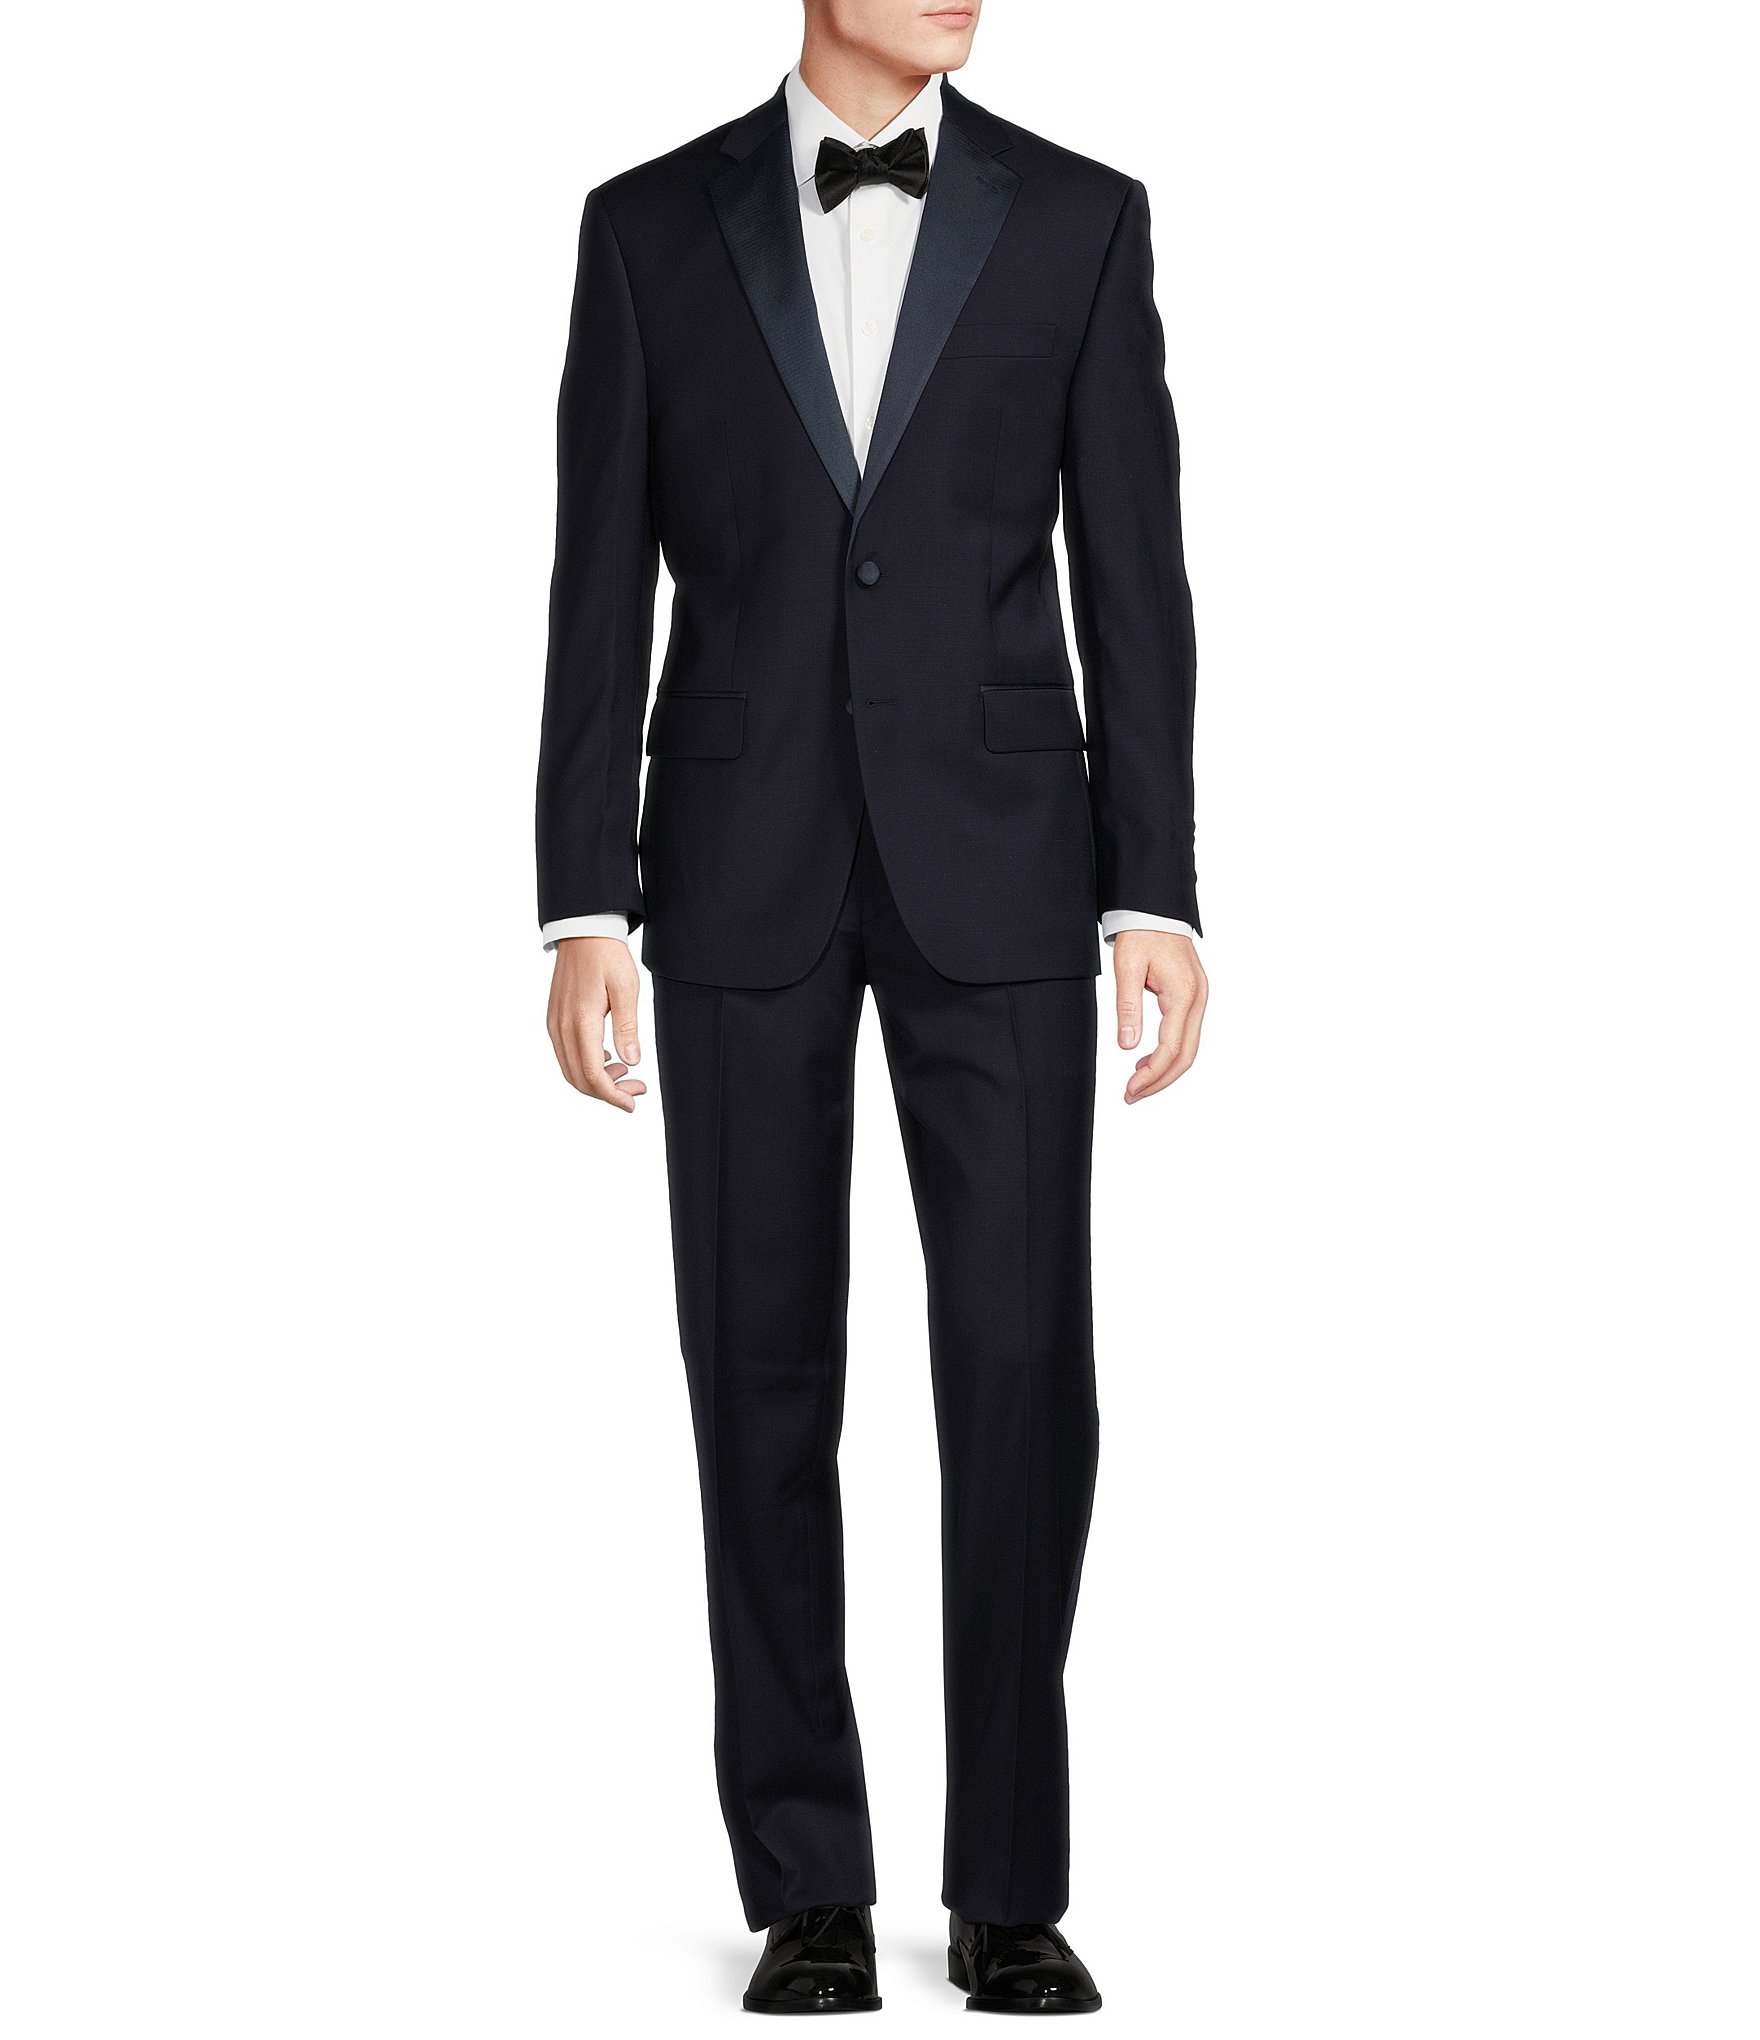 Hickey Freeman Classic Fit Flat Front Solid 2-Piece Tuxedo Suit | Dillard's